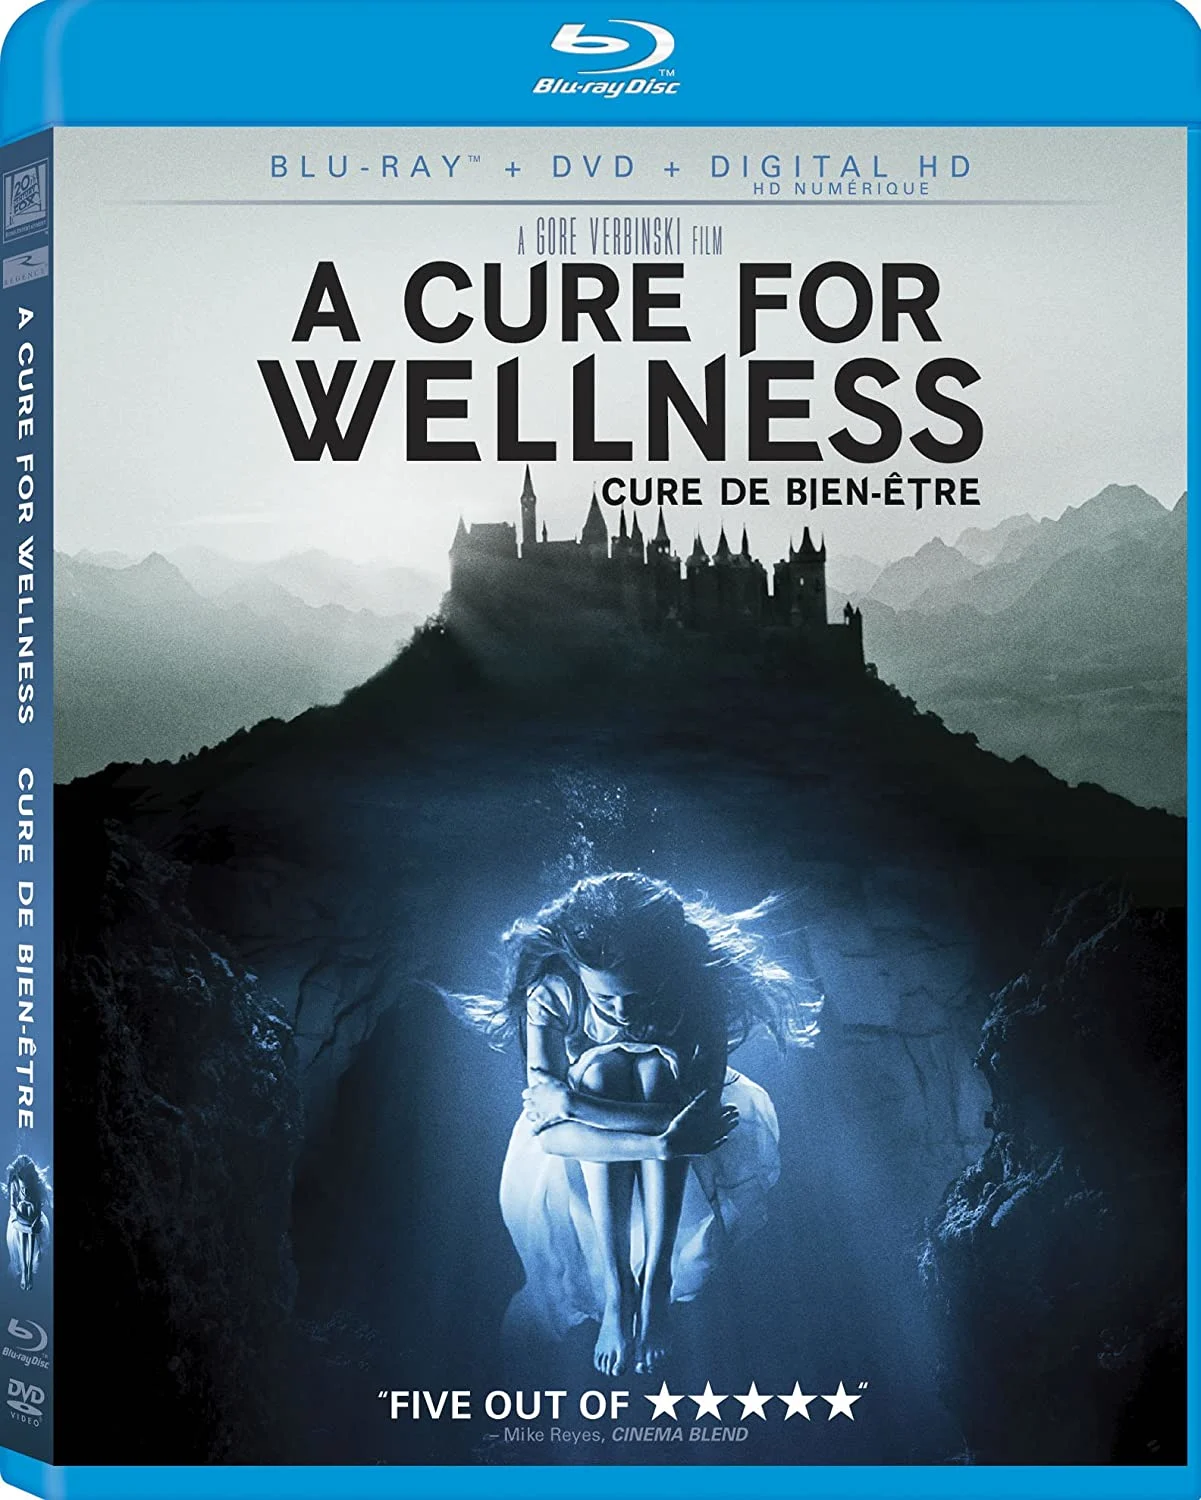 Cure For Wellness, A (Blu-ray/DVD Combo) on MovieShack